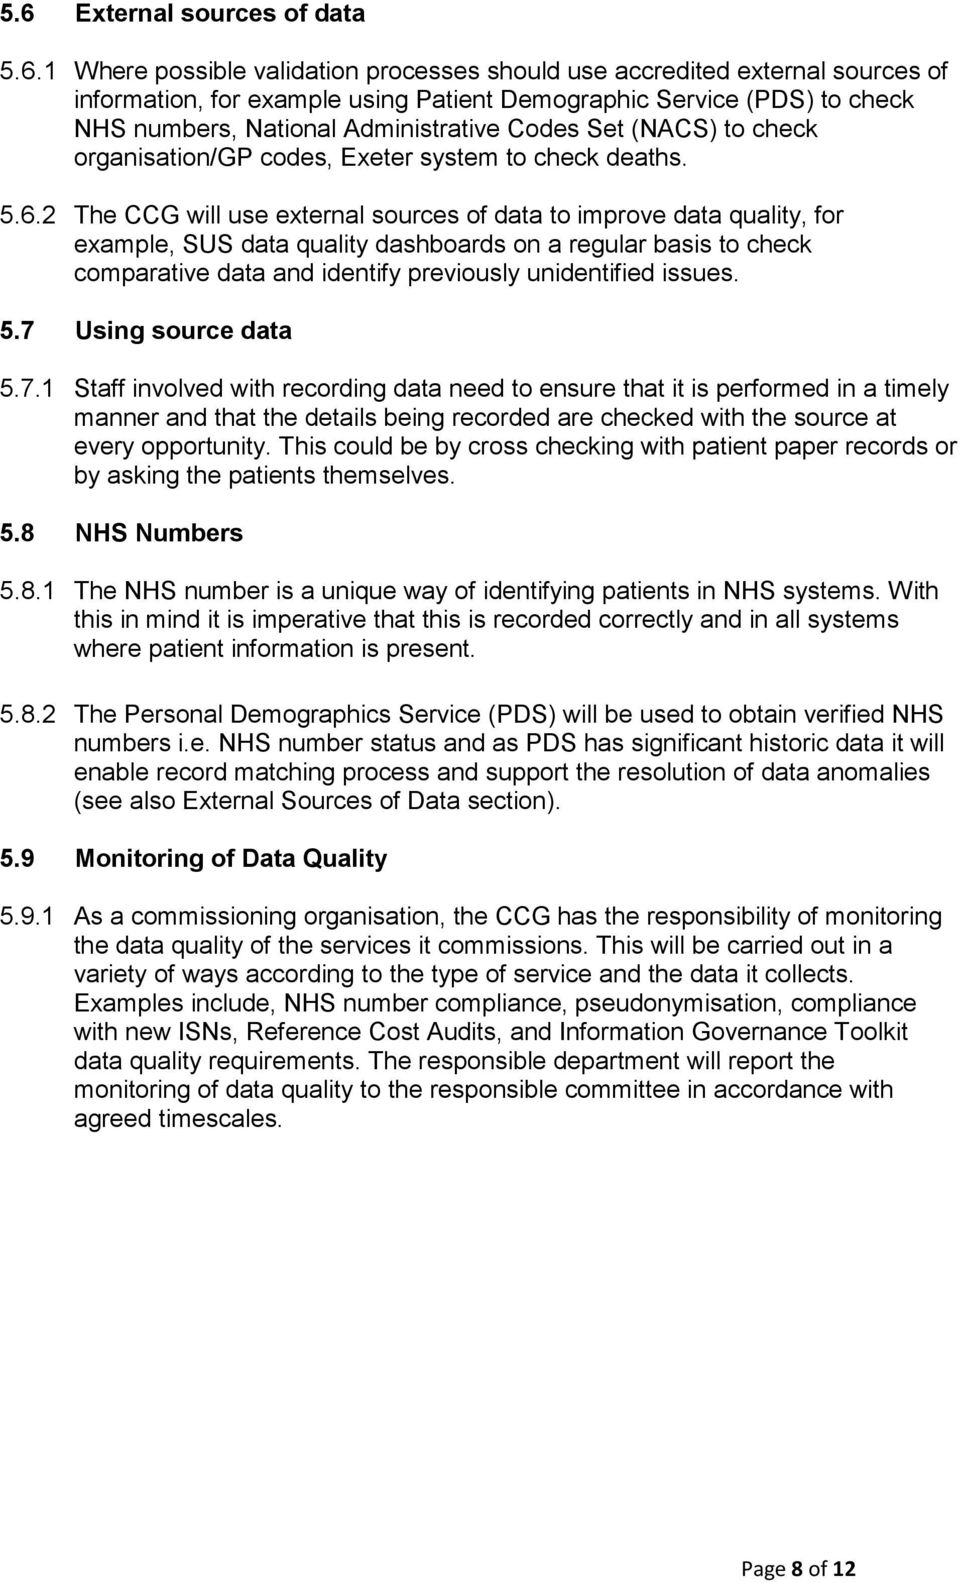 2 The CCG will use external sources of data to improve data quality, for example, SUS data quality dashboards on a regular basis to check comparative data and identify previously unidentified issues.